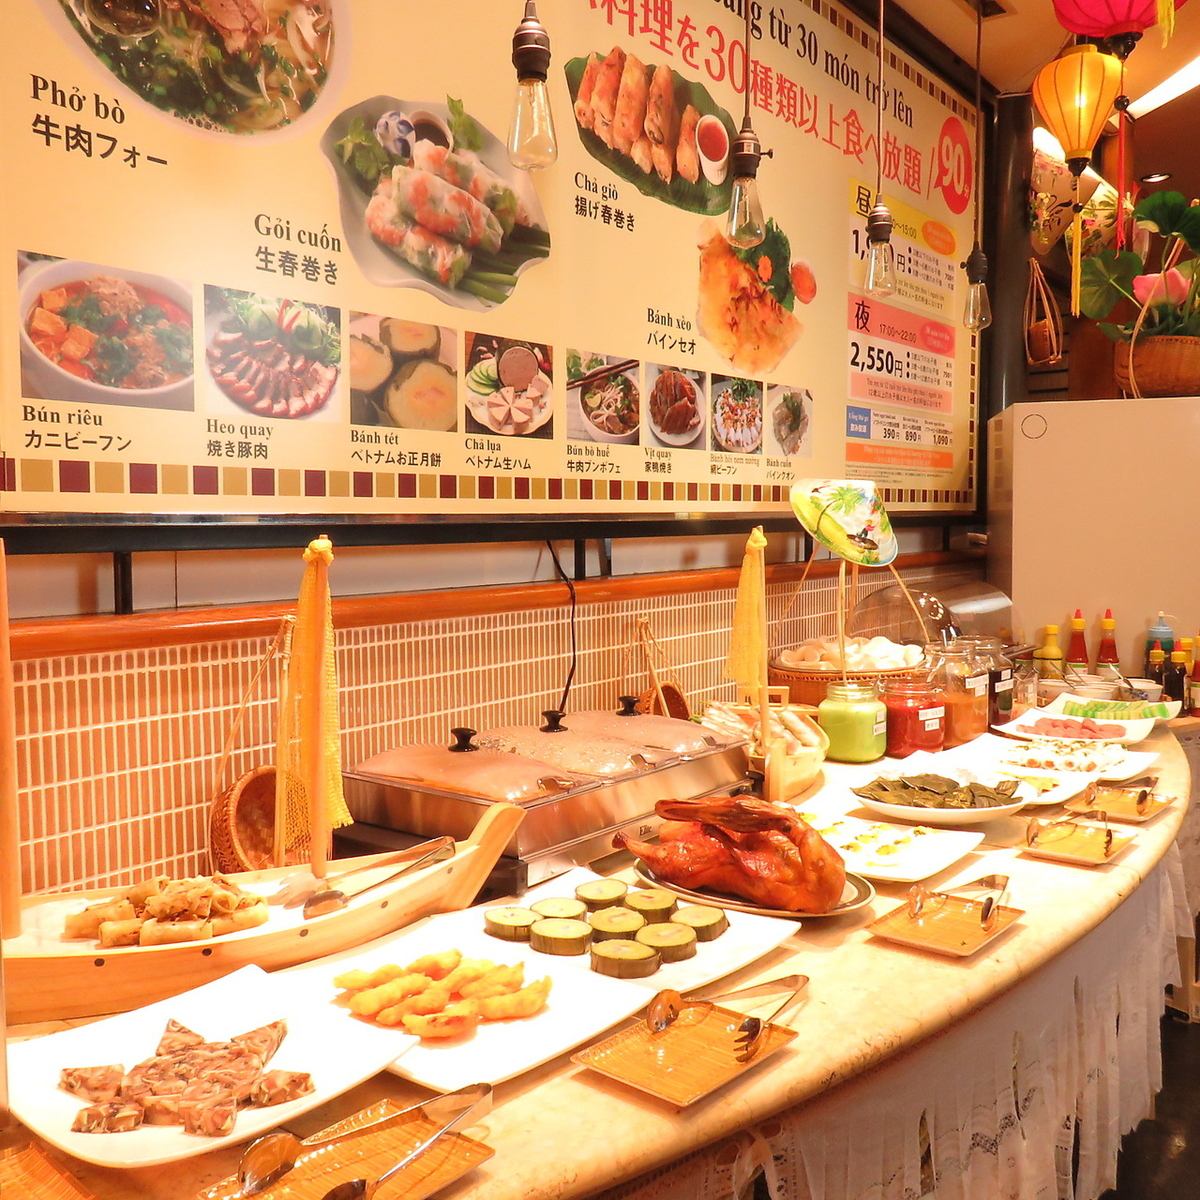 All you can eat and drink authentic Vietnamese food ♪ Dinner 90 minutes 2,550 yen ~ Set meals are also available.